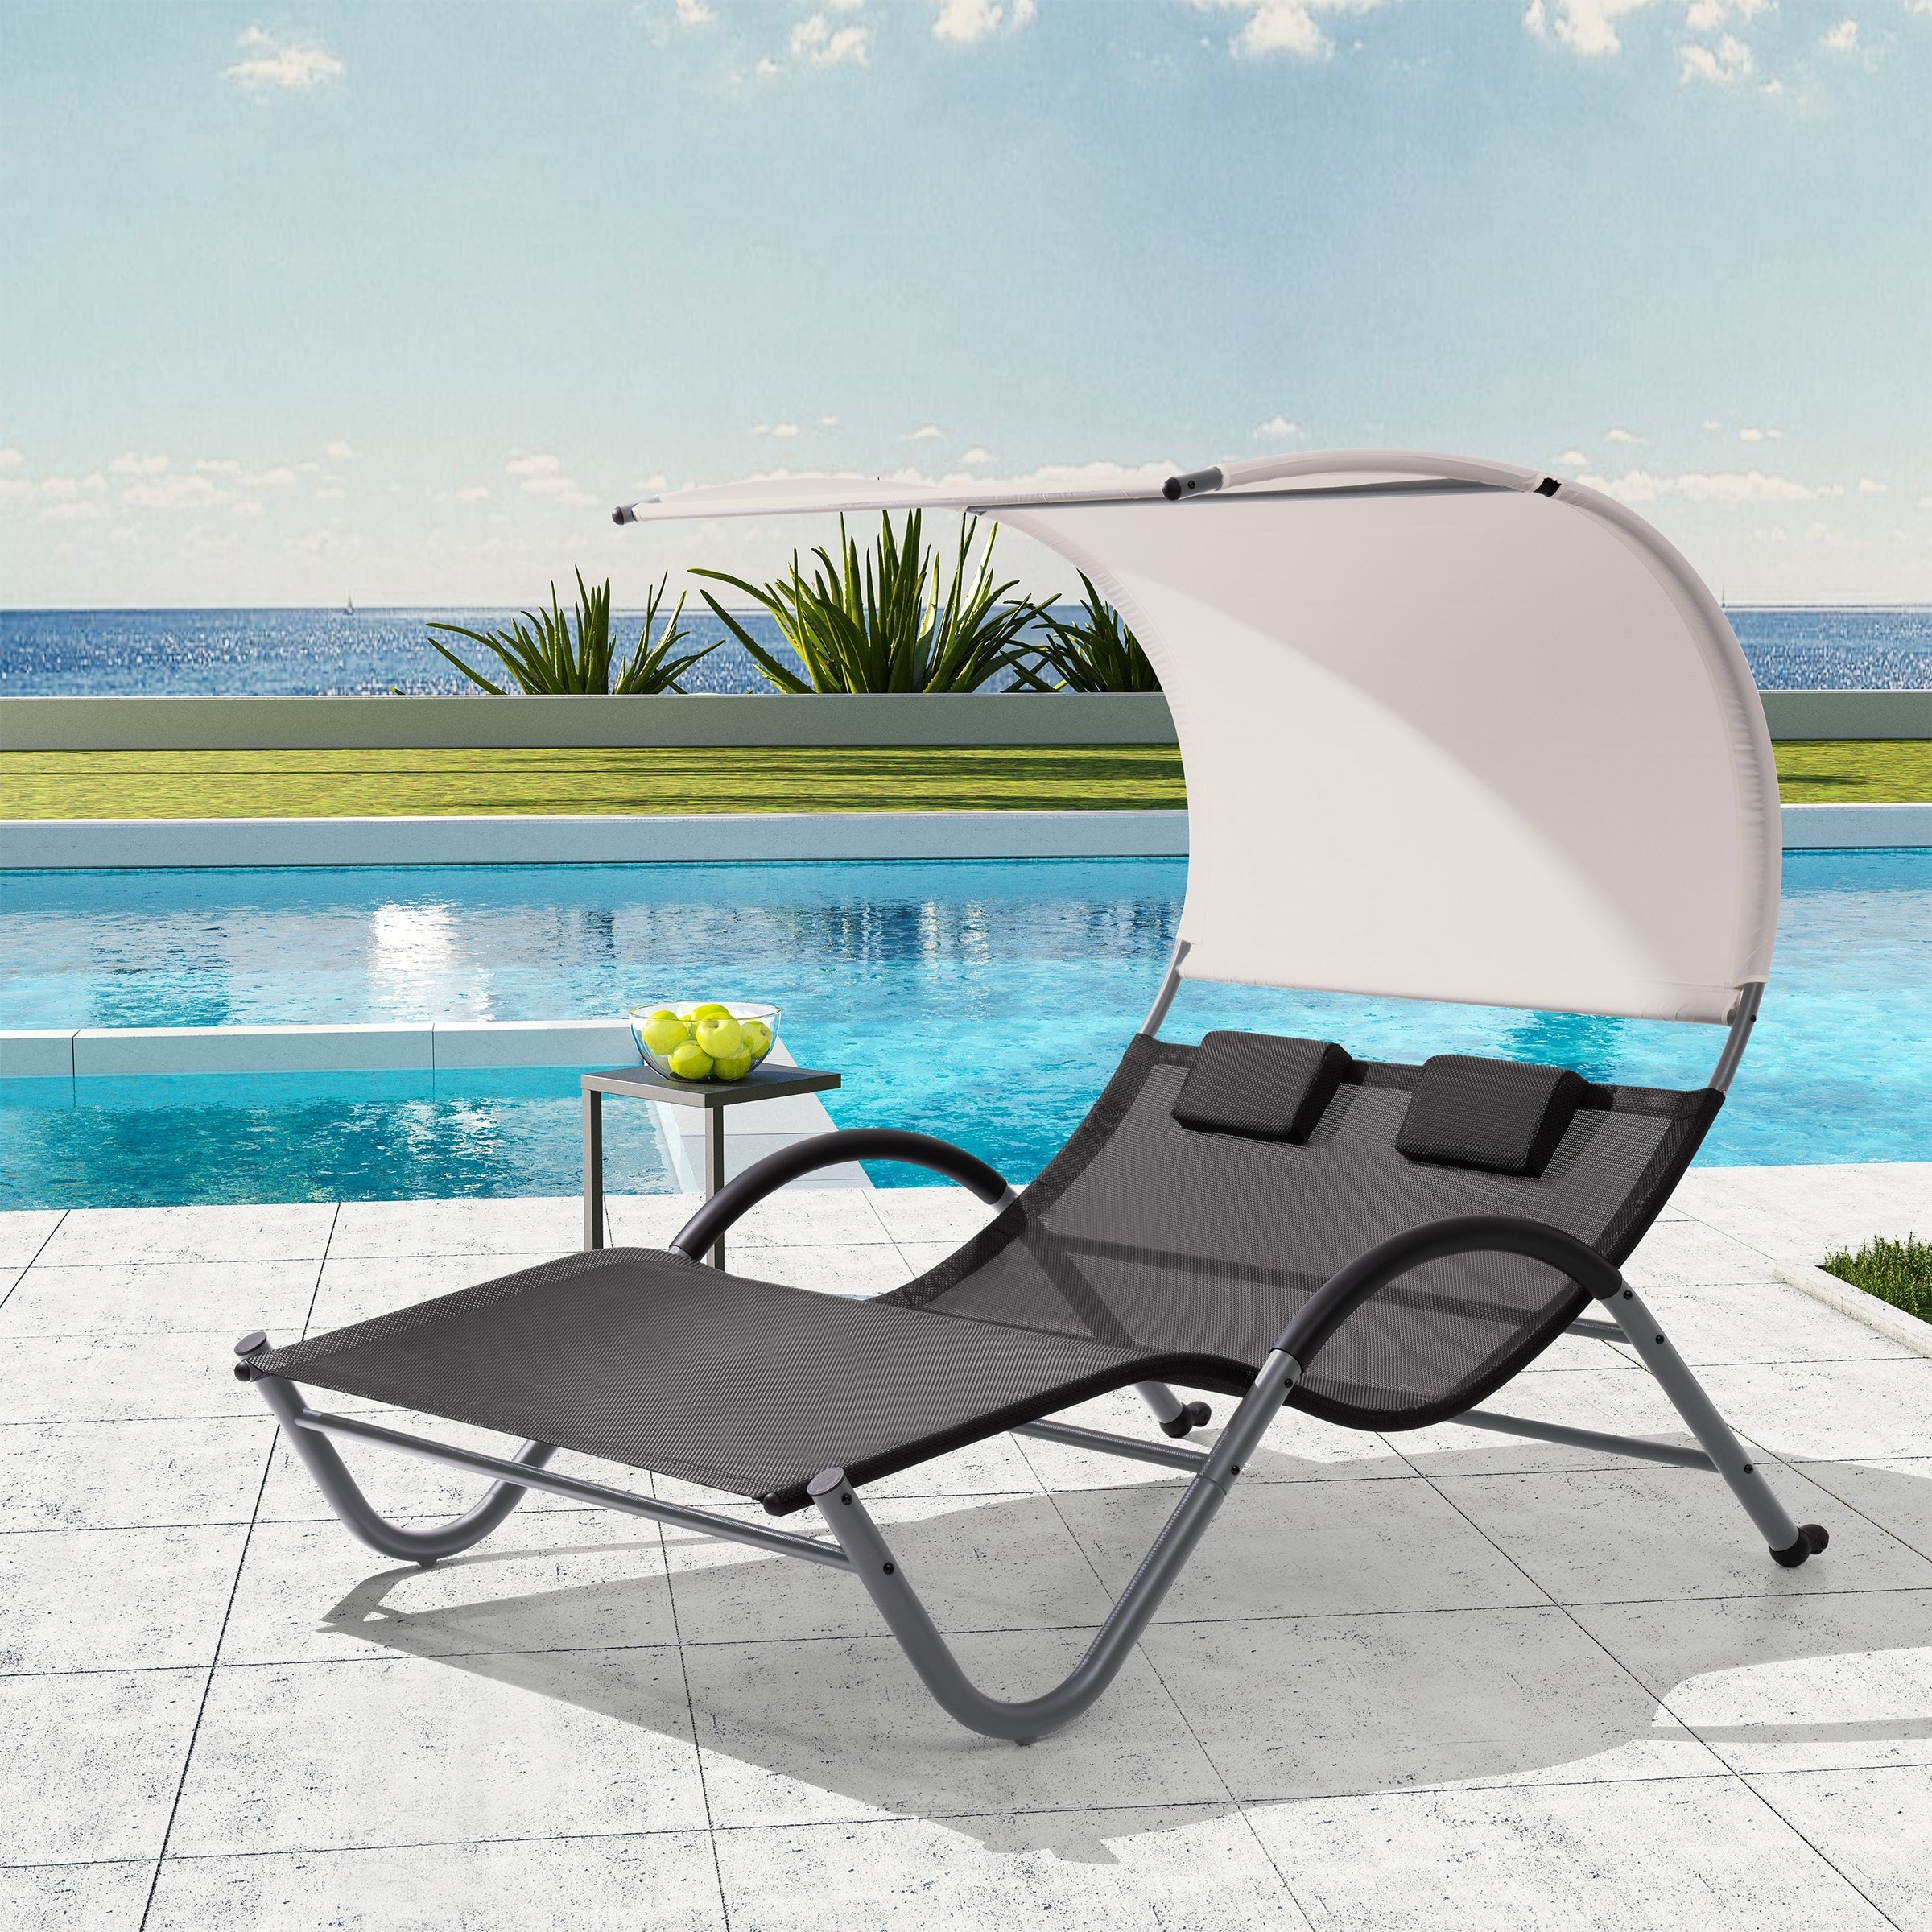 Vredhom Outdoor Double Chaise Lounge With Wheels and Headrest - 54.93 W X 72.84 L X 64.57 H Inch